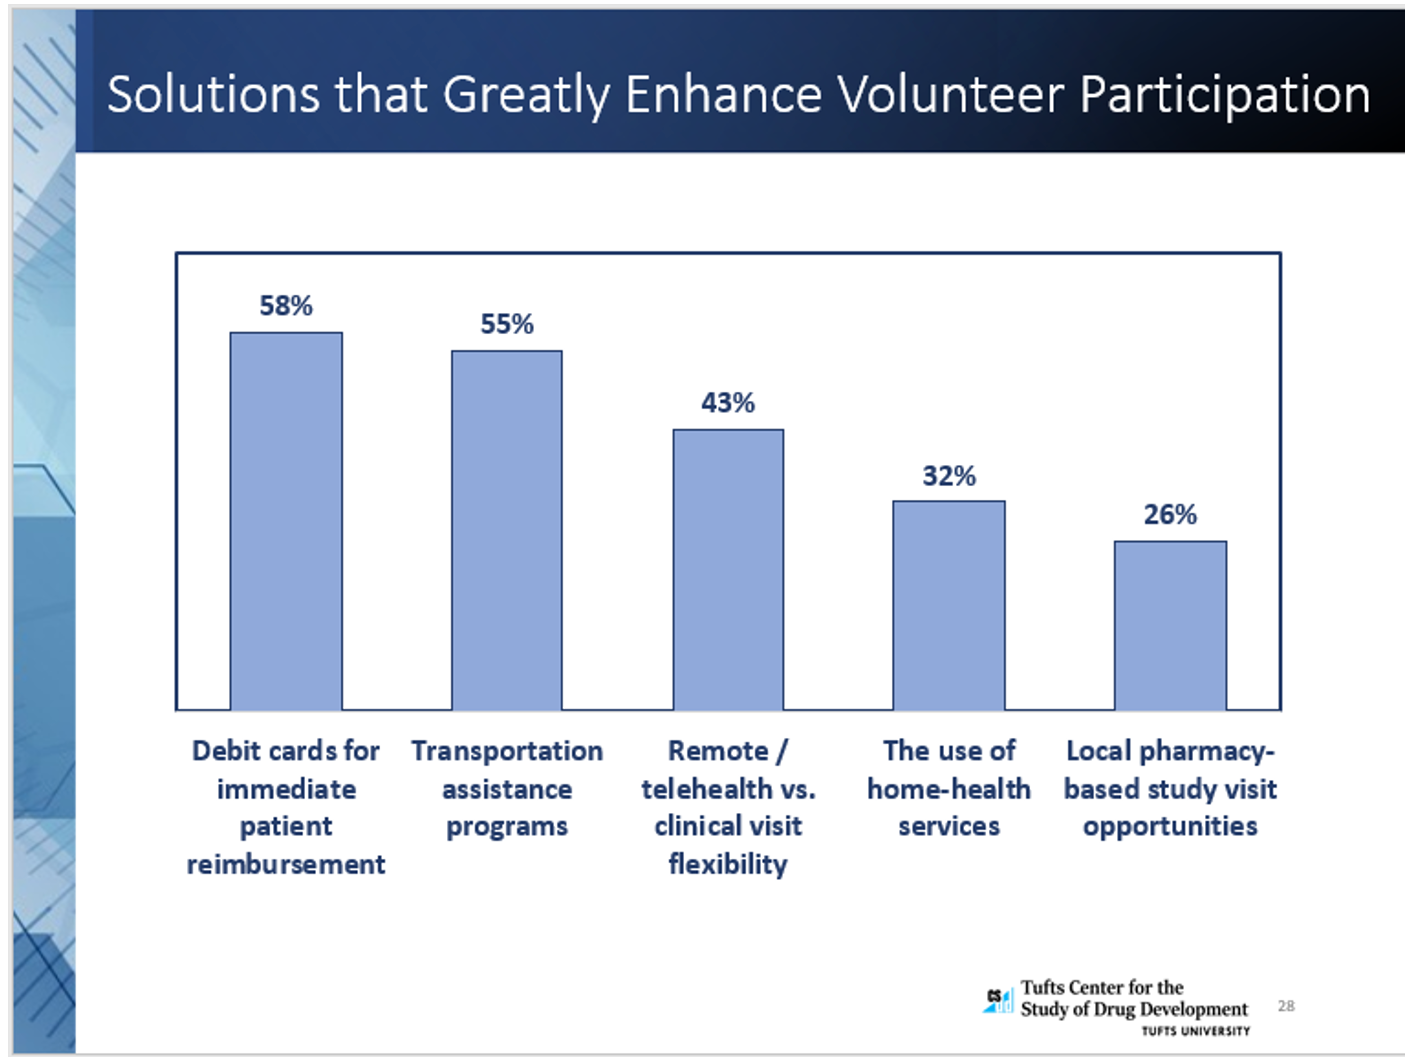 Figure 2. Solutions that greatly enhance volunteer participation